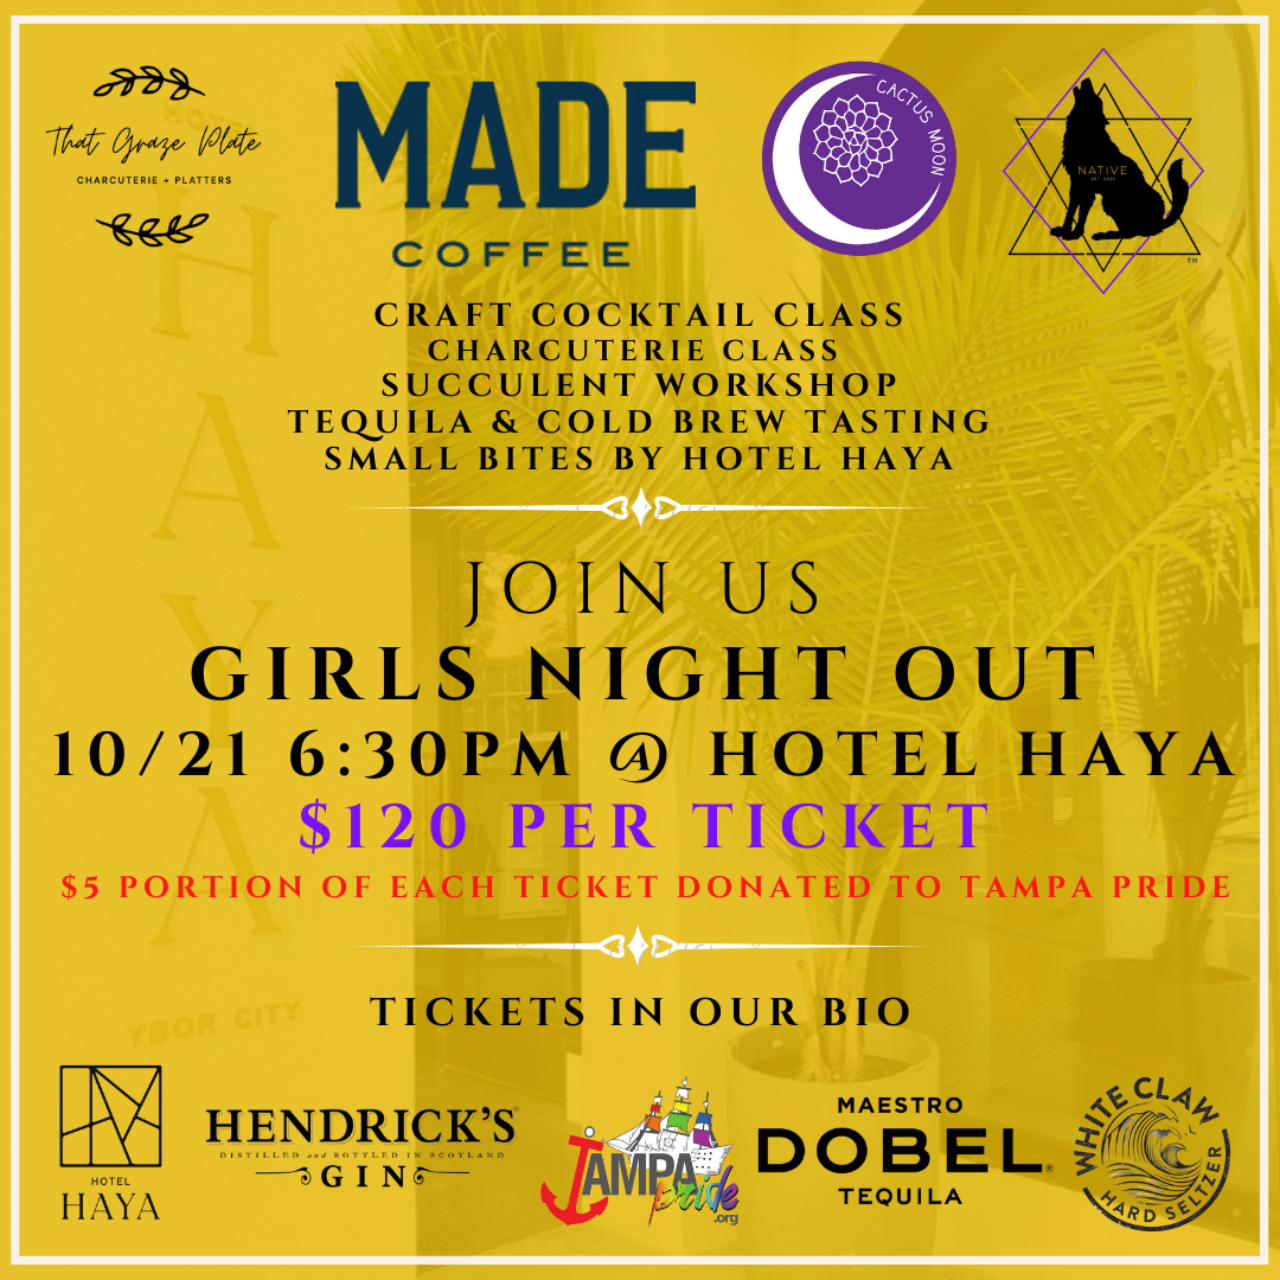 Girls Night Out flyer hosted at Hotel Haya